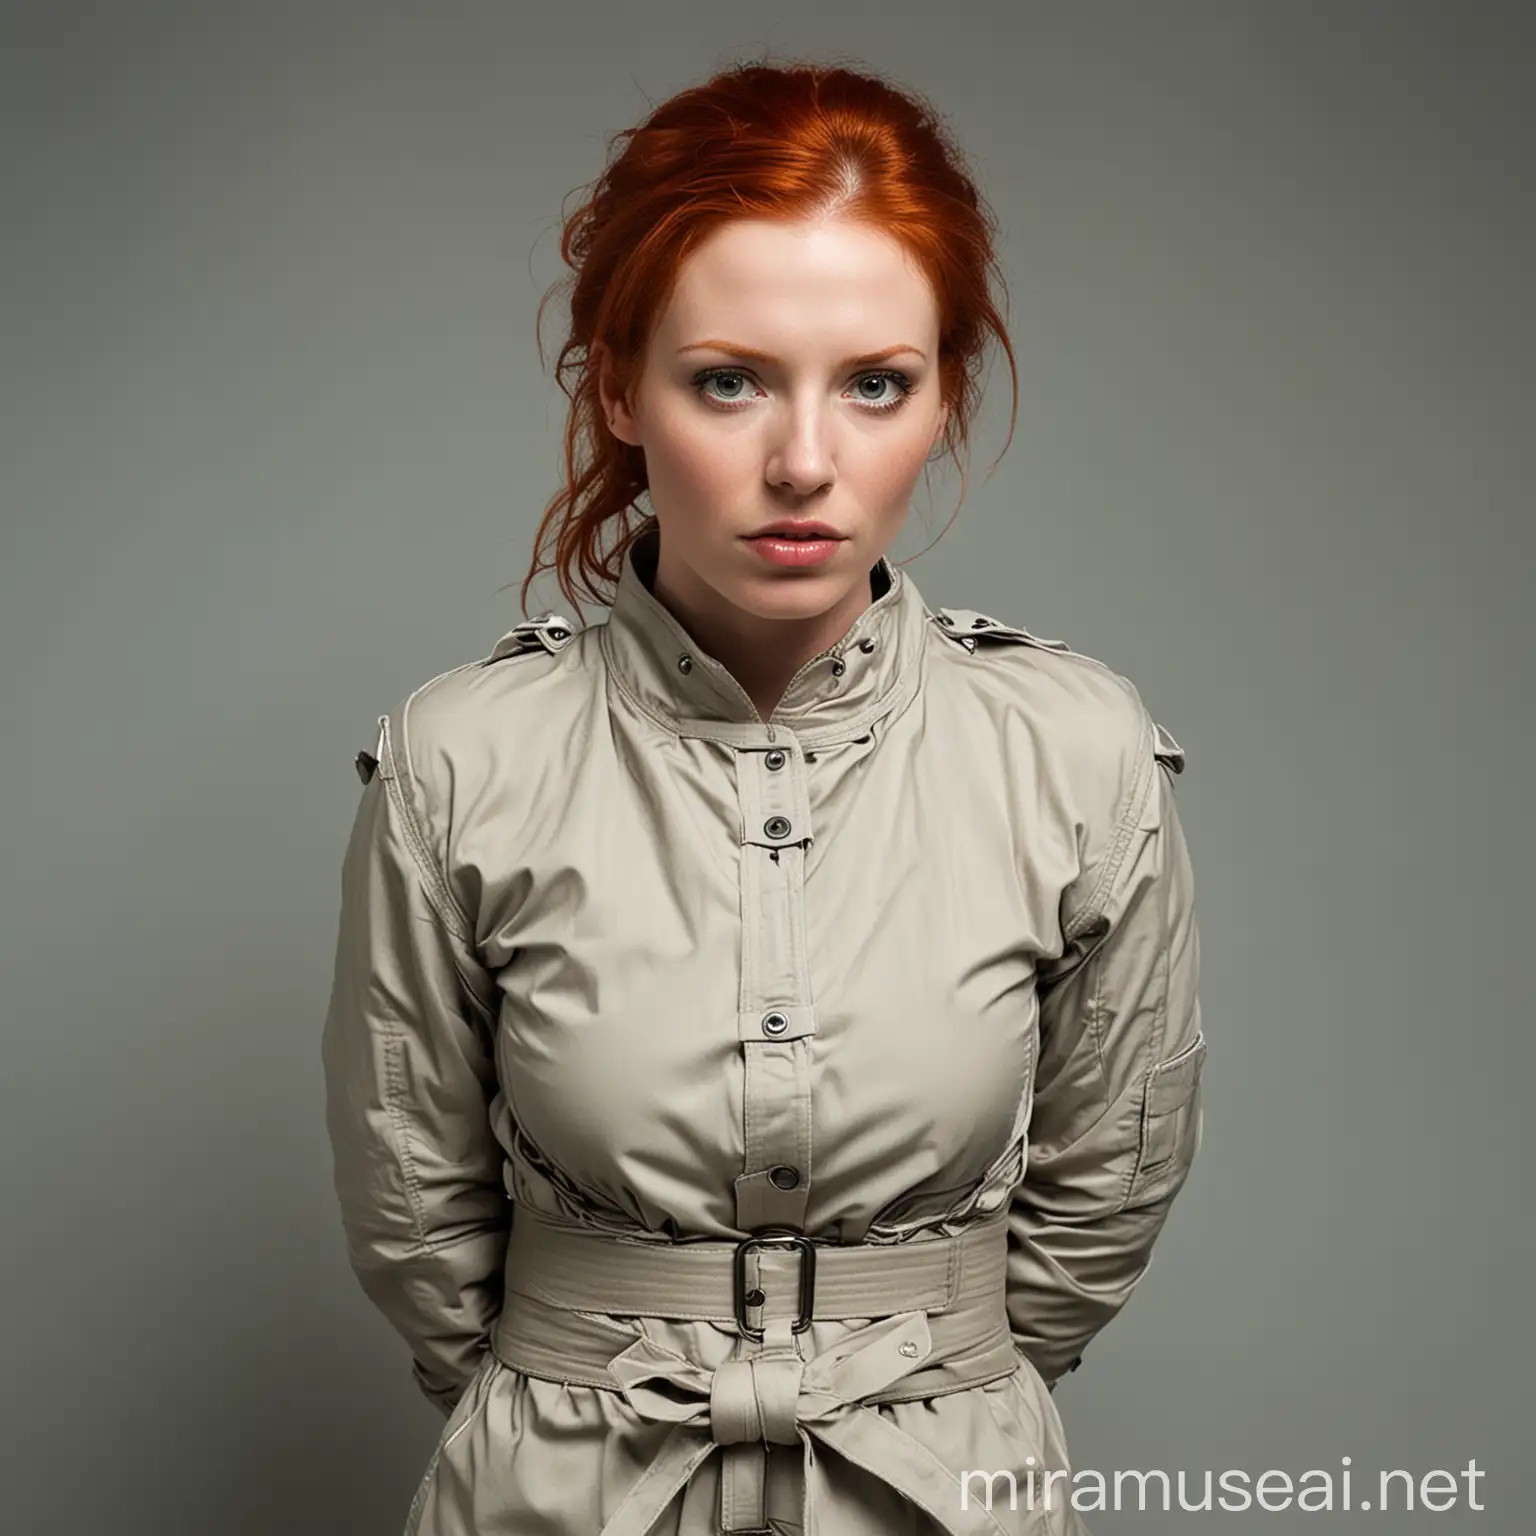 Beautiful Redheaded Woman in a Straitjacket